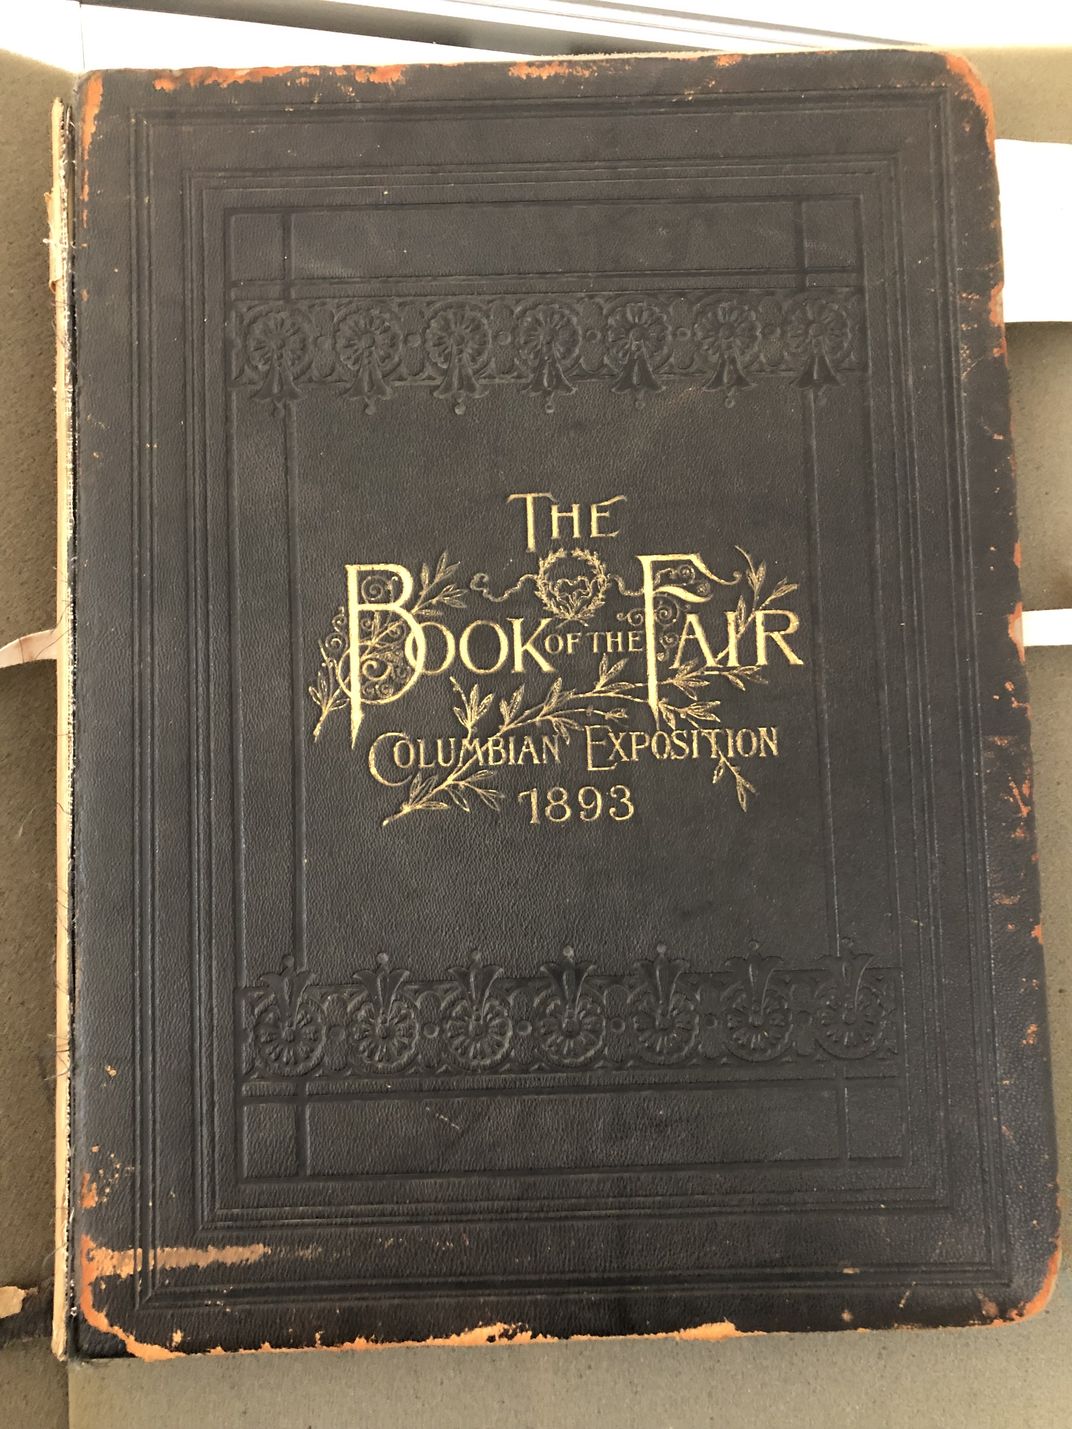 Book cover of "The Book of the Fair"